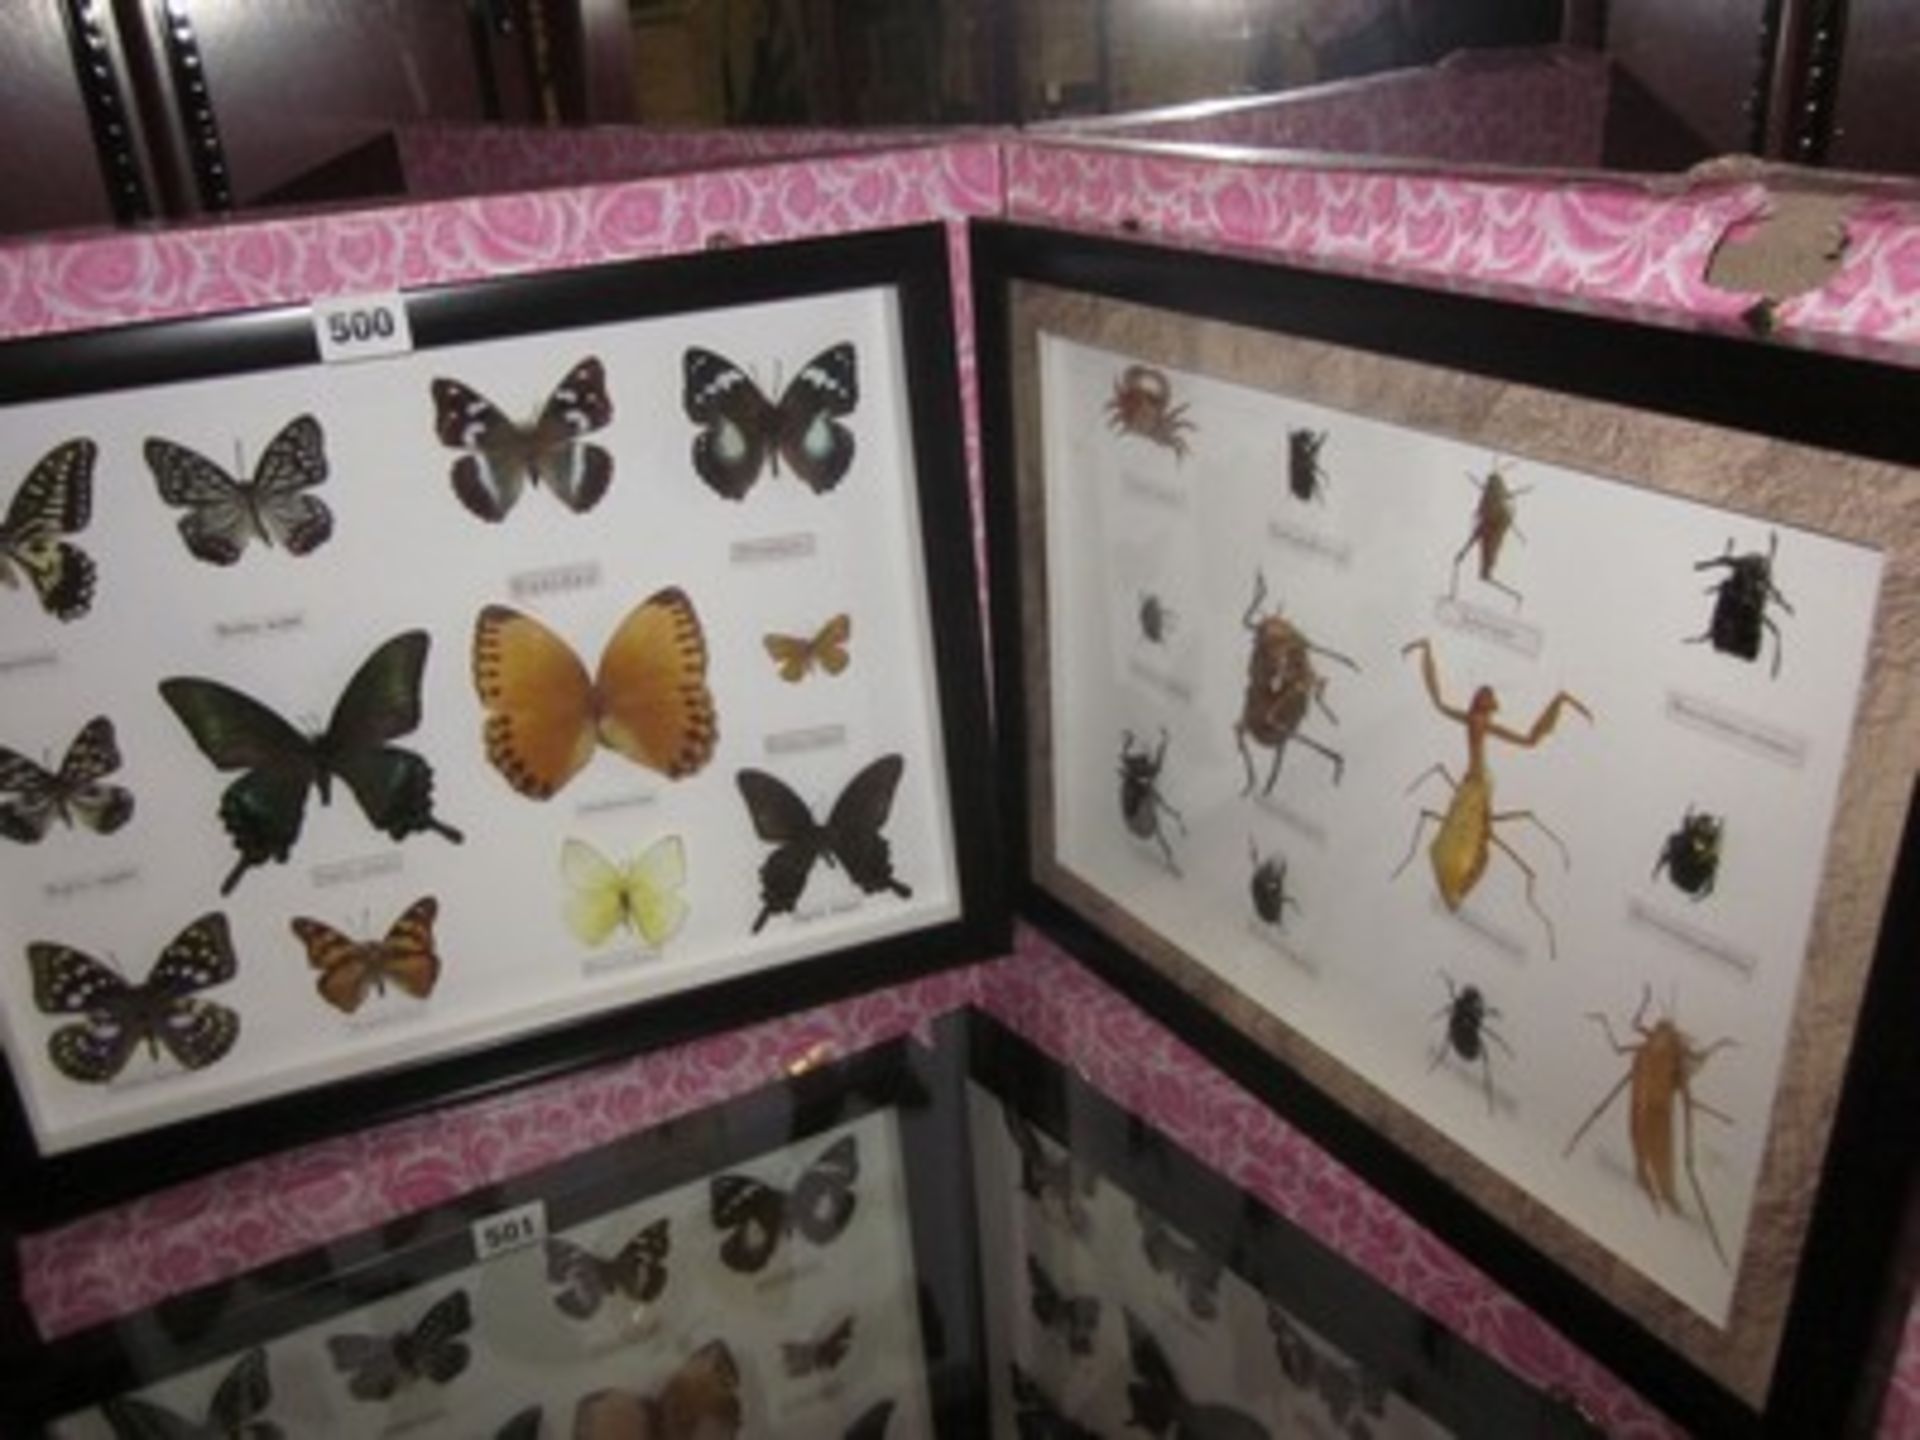 A framed case of butterflies together with a similar example with insects.